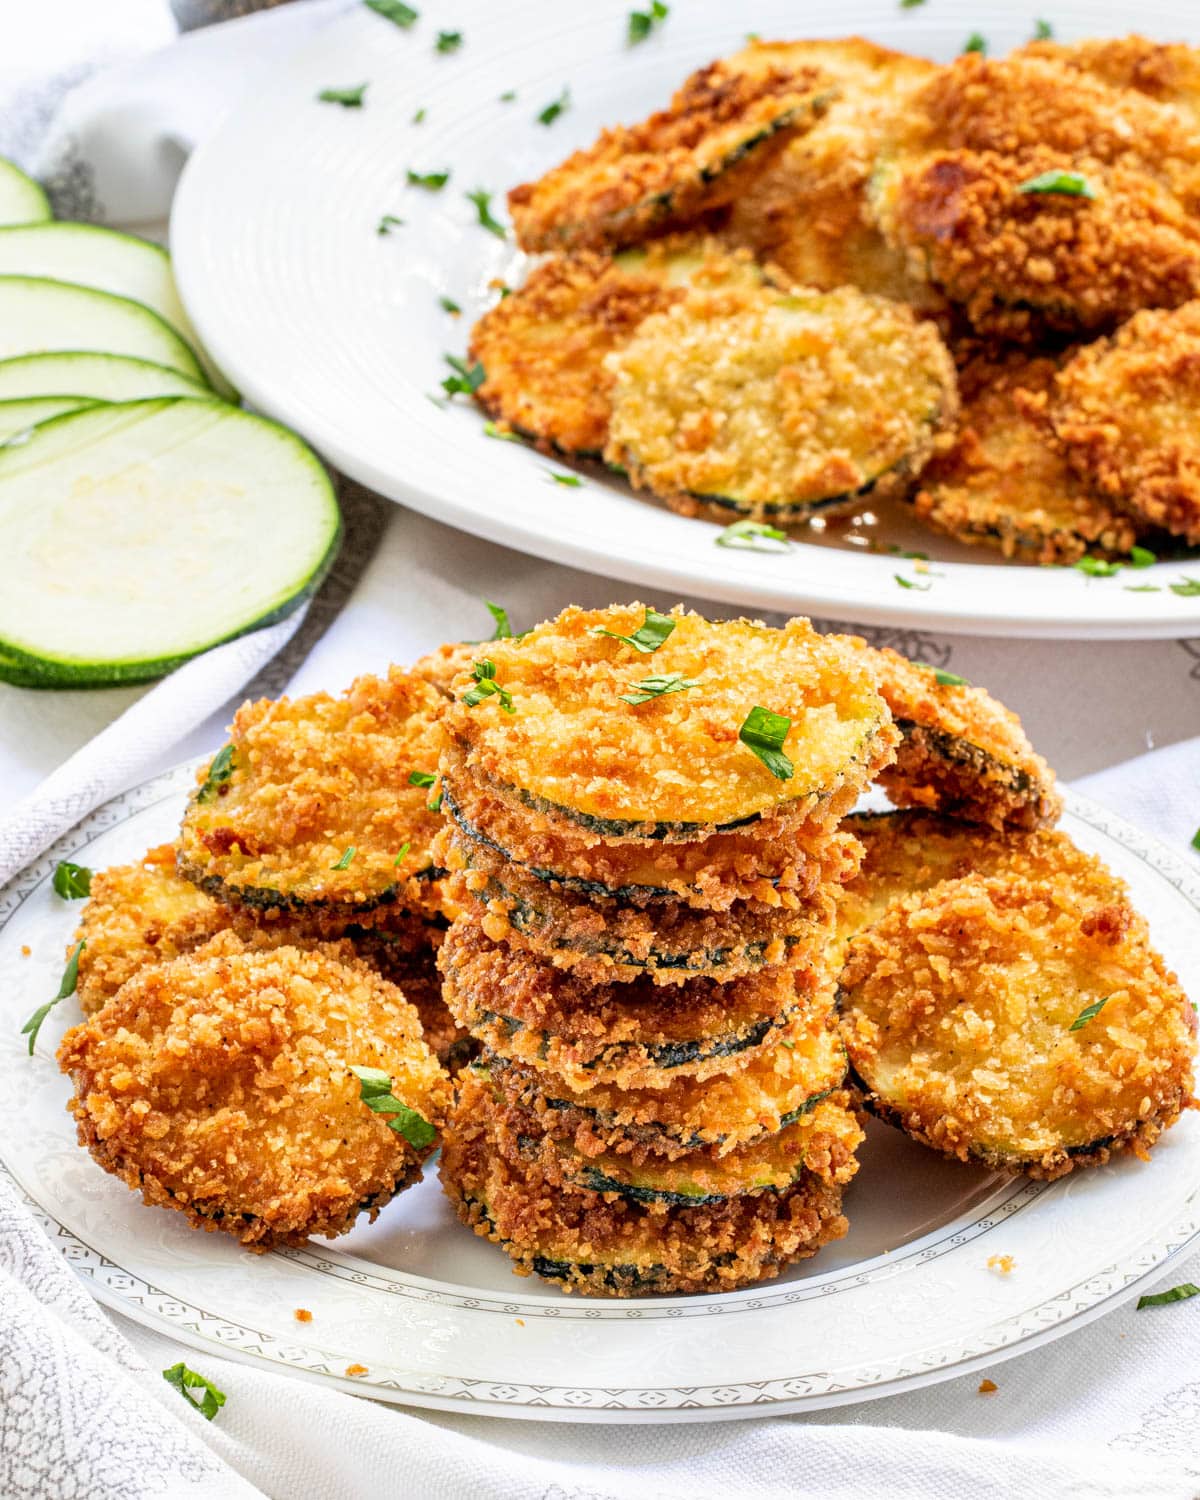 Crispy Fried Zucchini - Craving Home Cooked